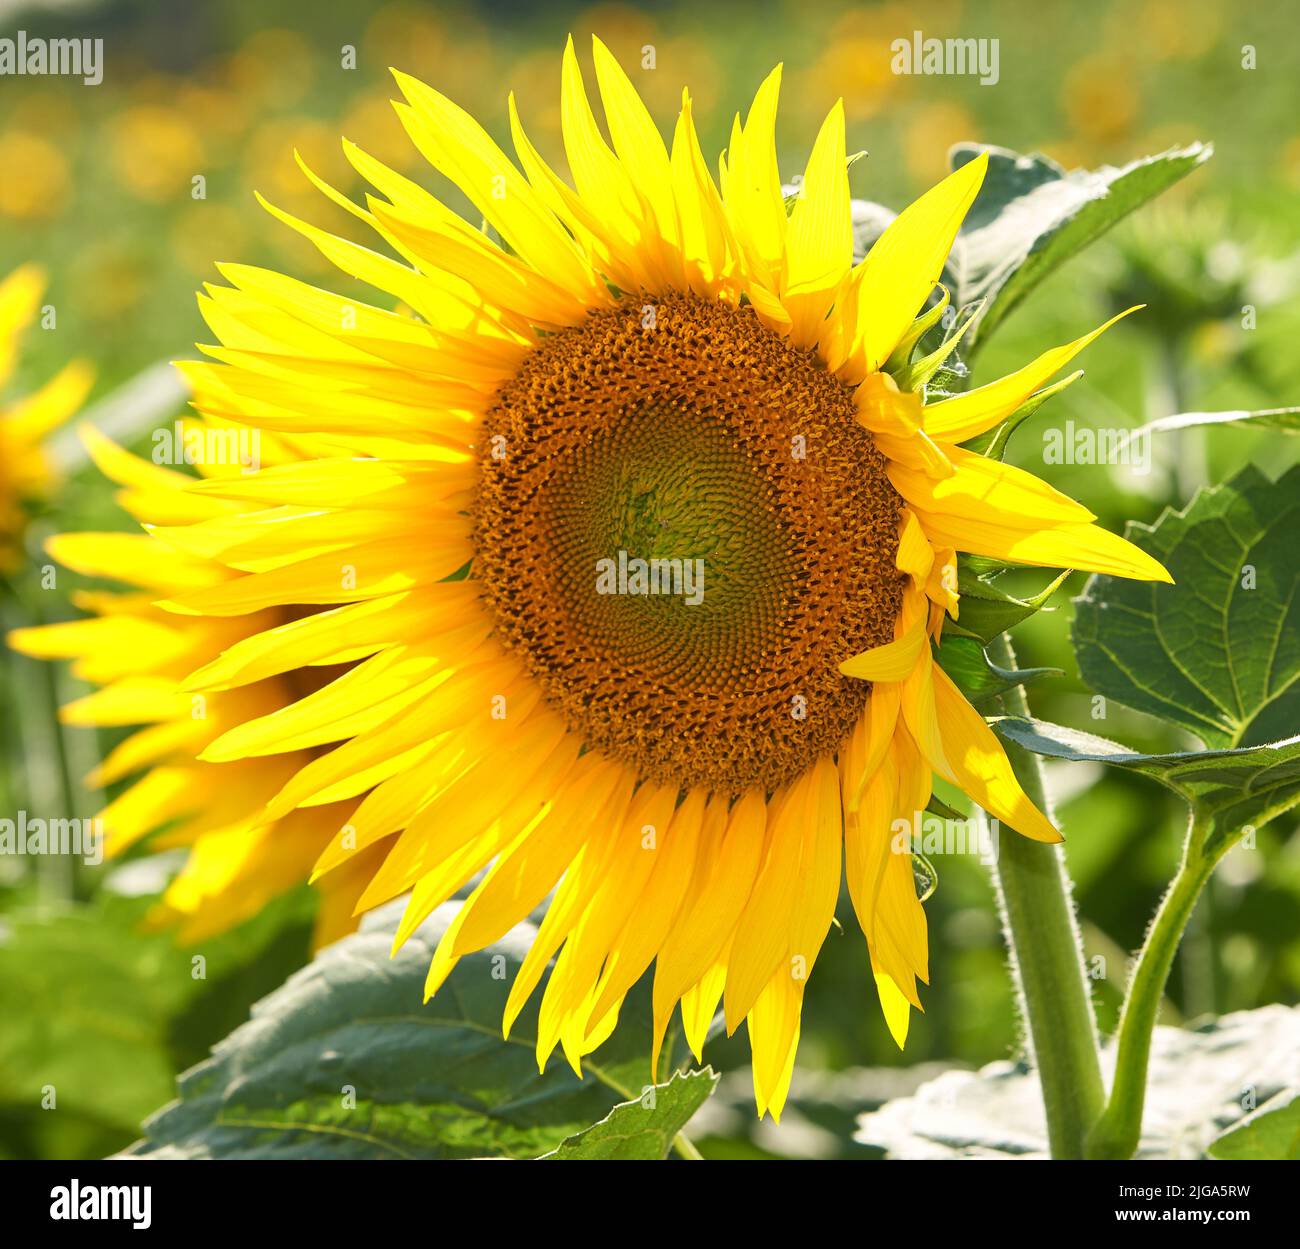 One sunflower growing in a field against a blurred nature background in summer. A single yellow flowering plant blooming on a green field in spring Stock Photo